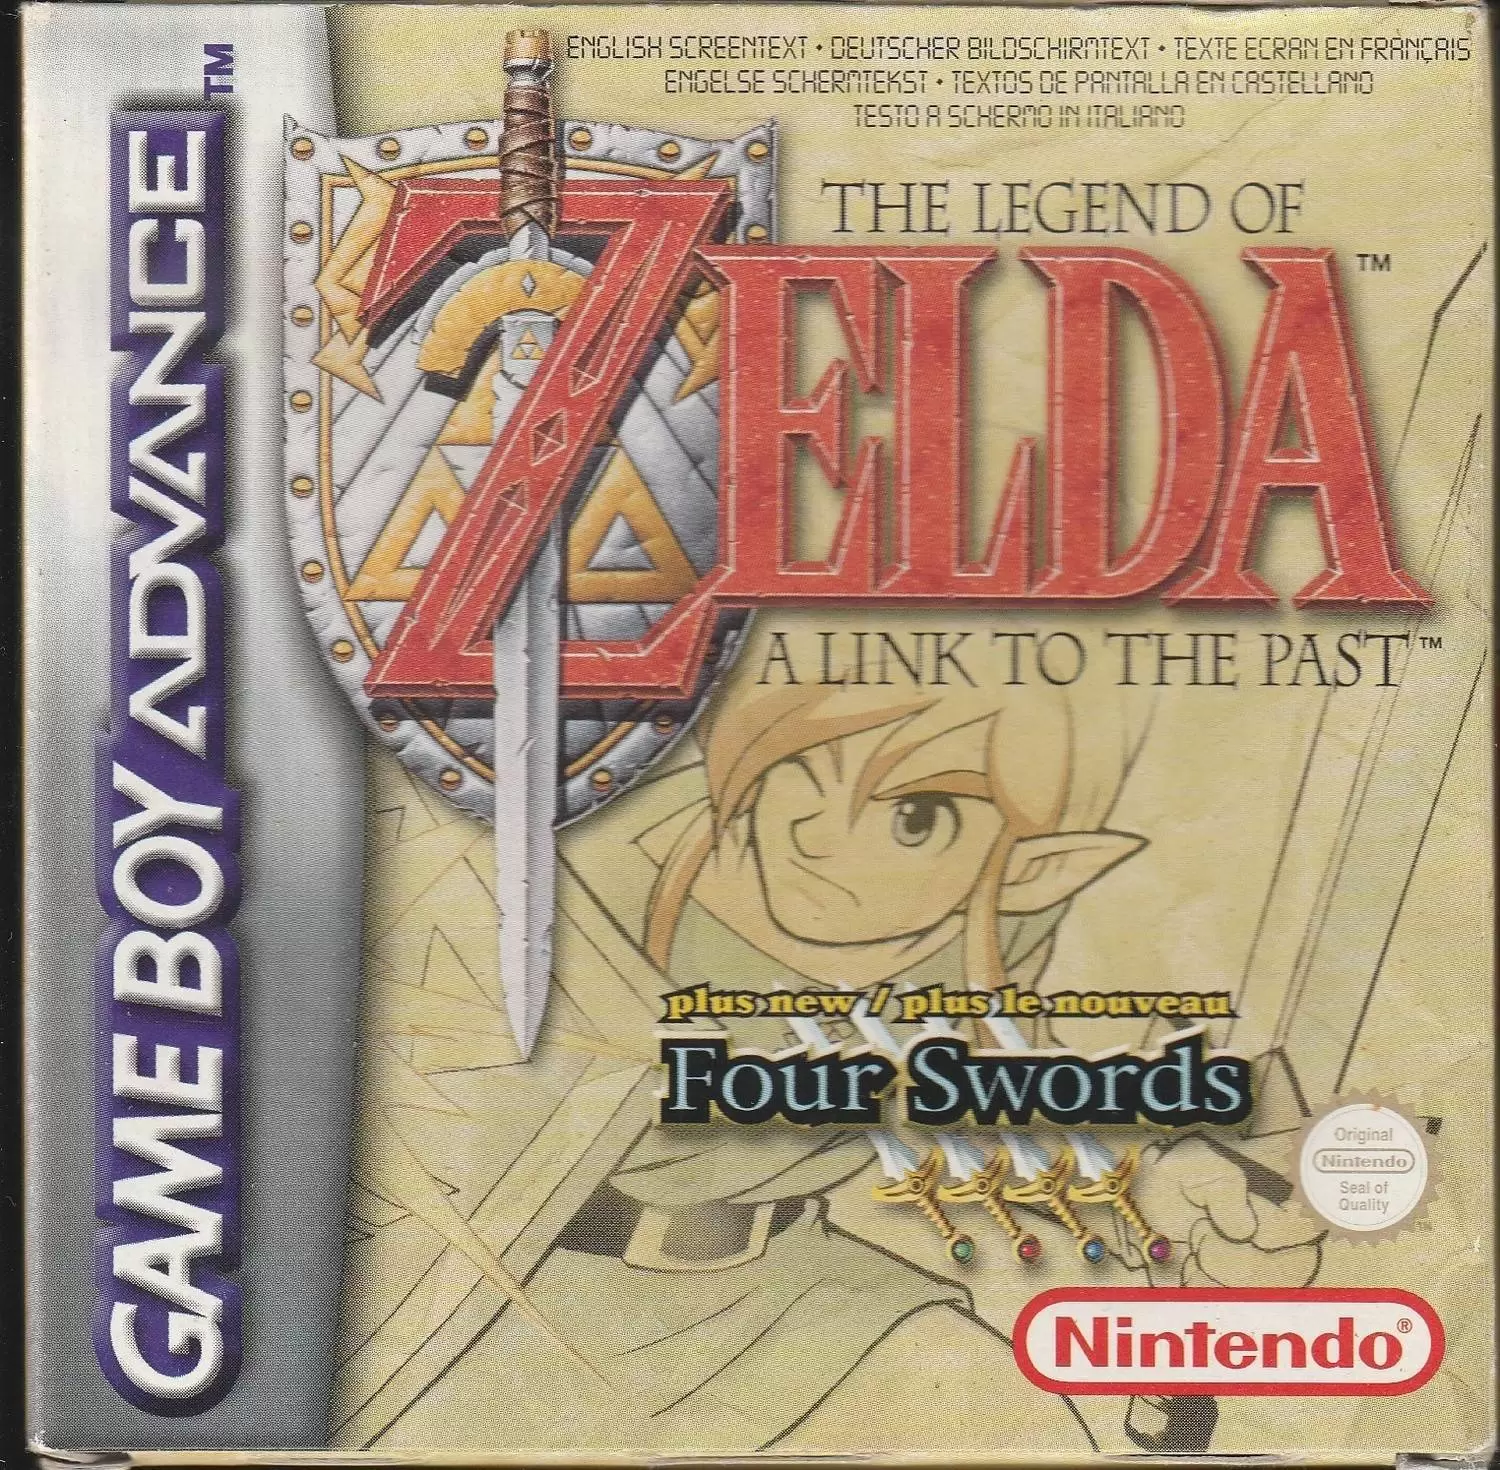 Jeux Game Boy Advance - The Legend of Zelda : A Link to the Past - Four Swords